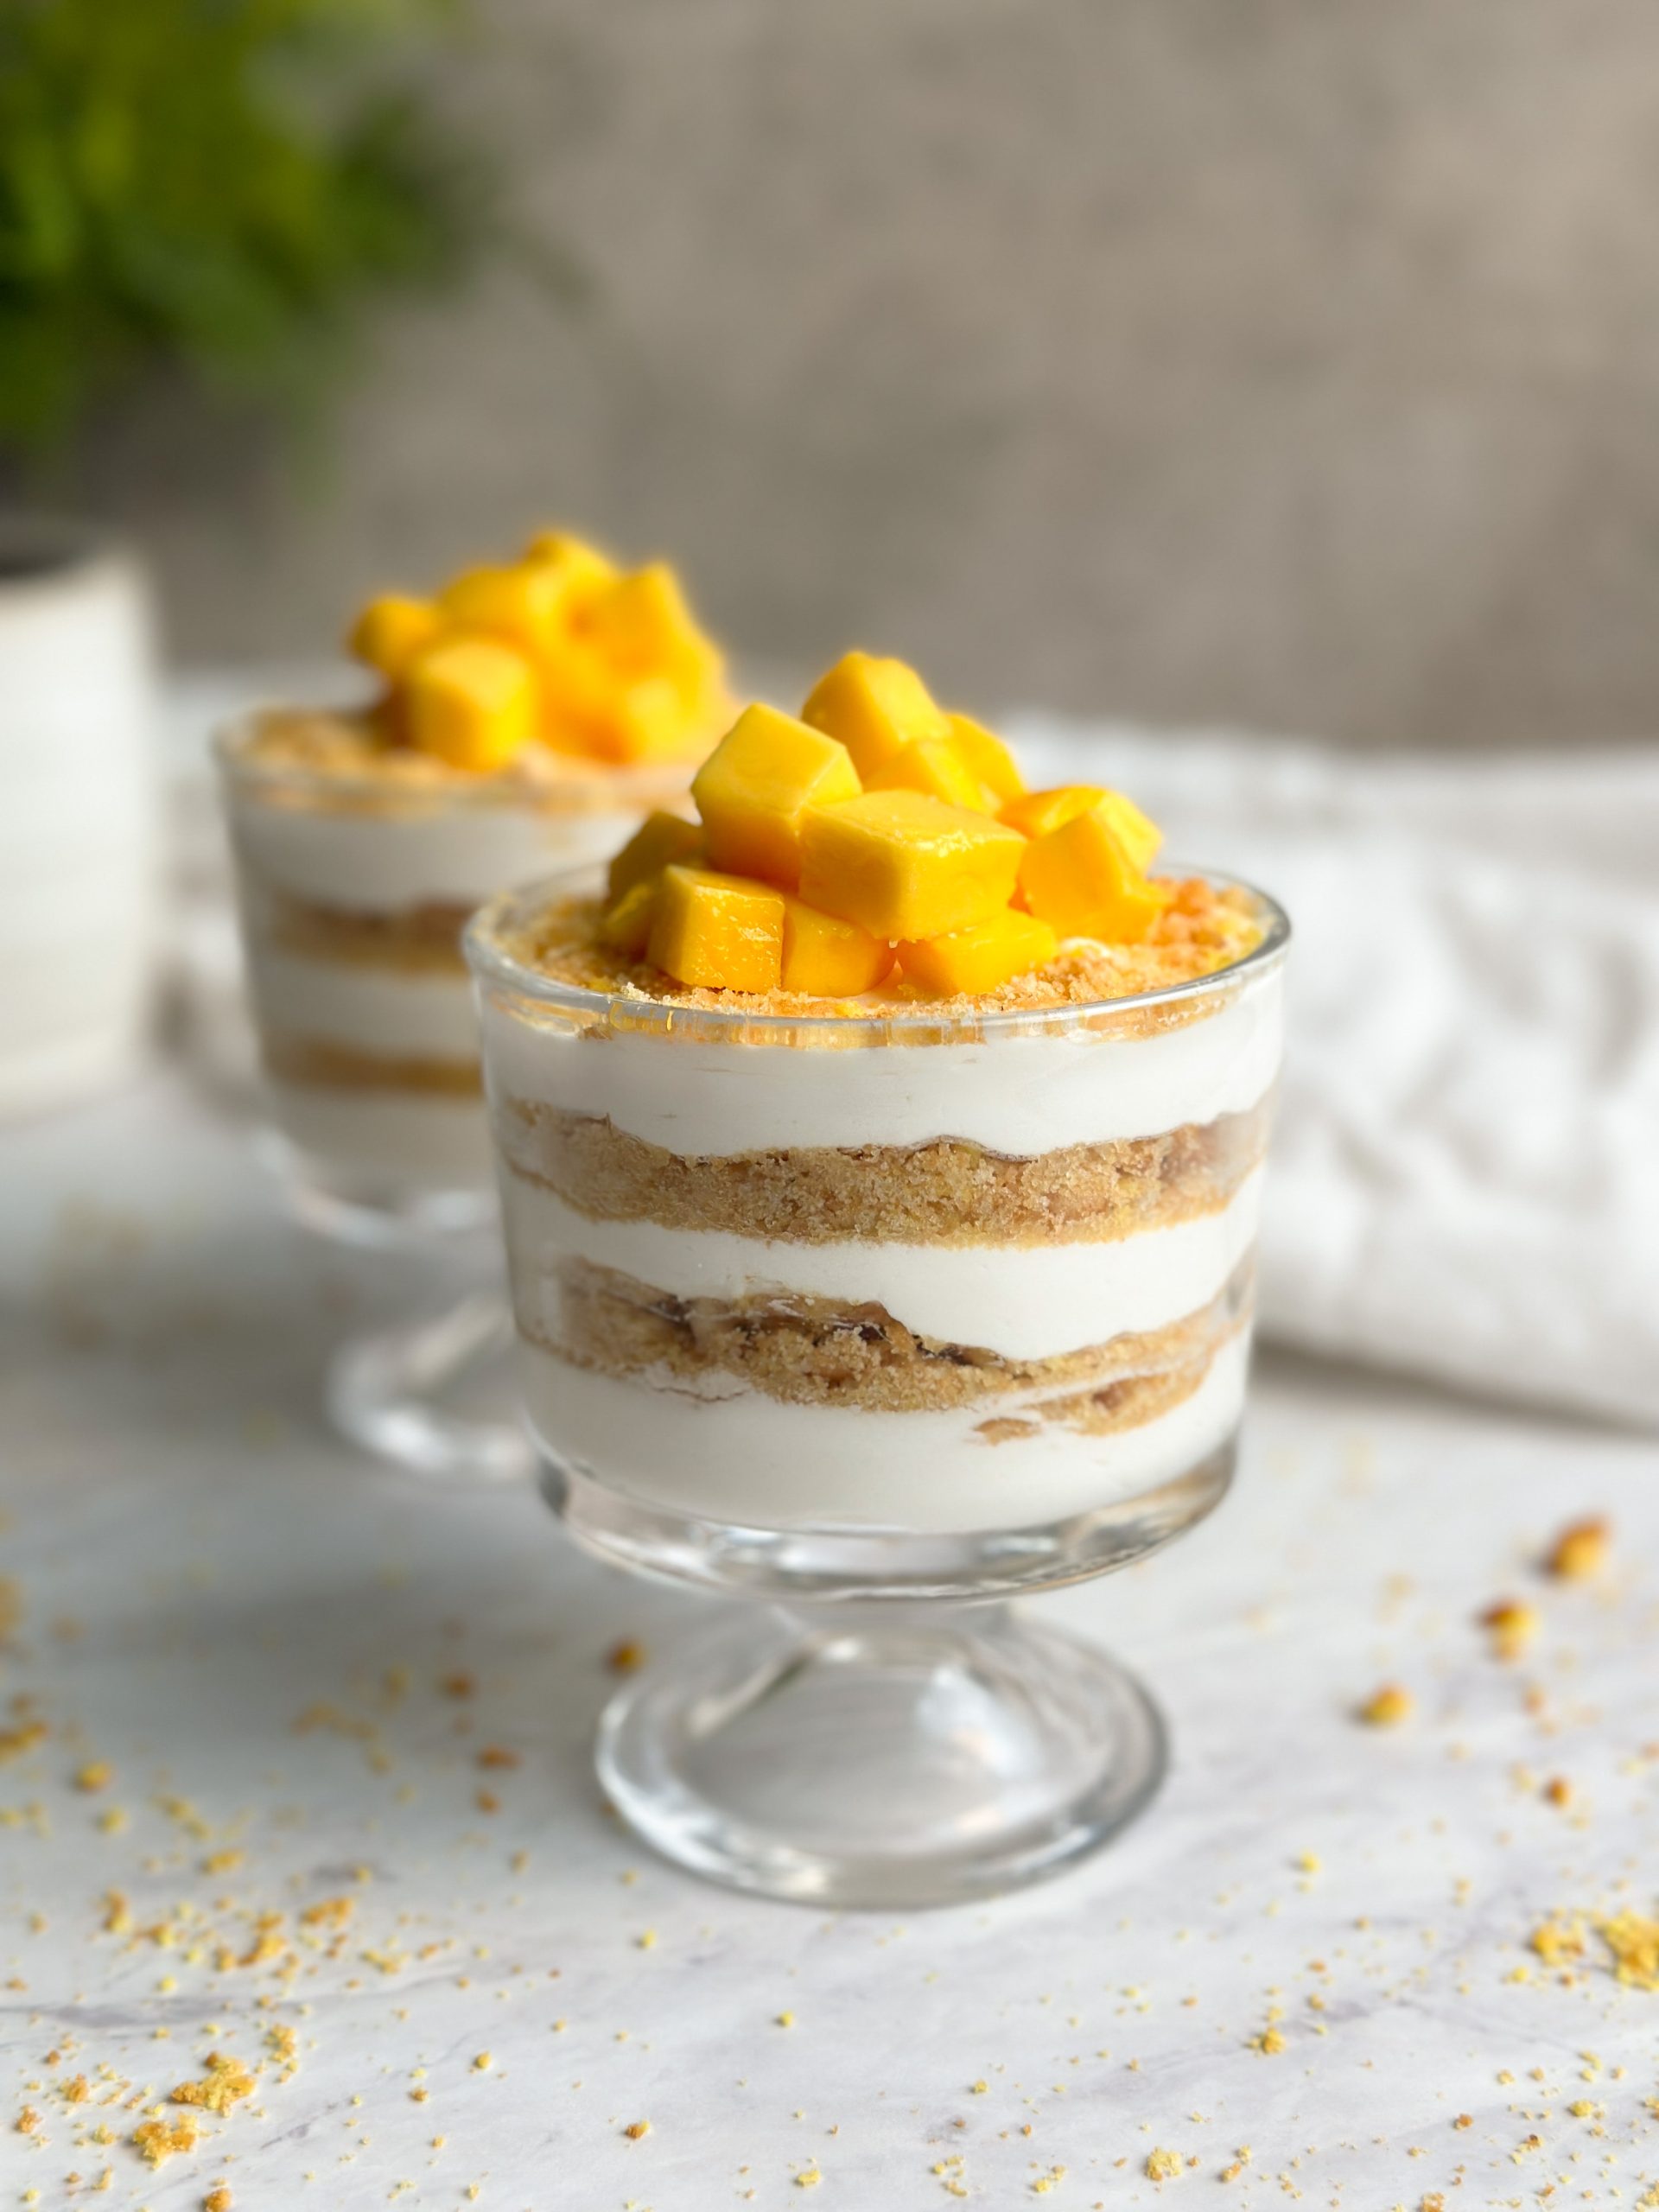 2 cups of yogurt parfait dessert with layers of yogurt and biscuits, topped with chopped mango